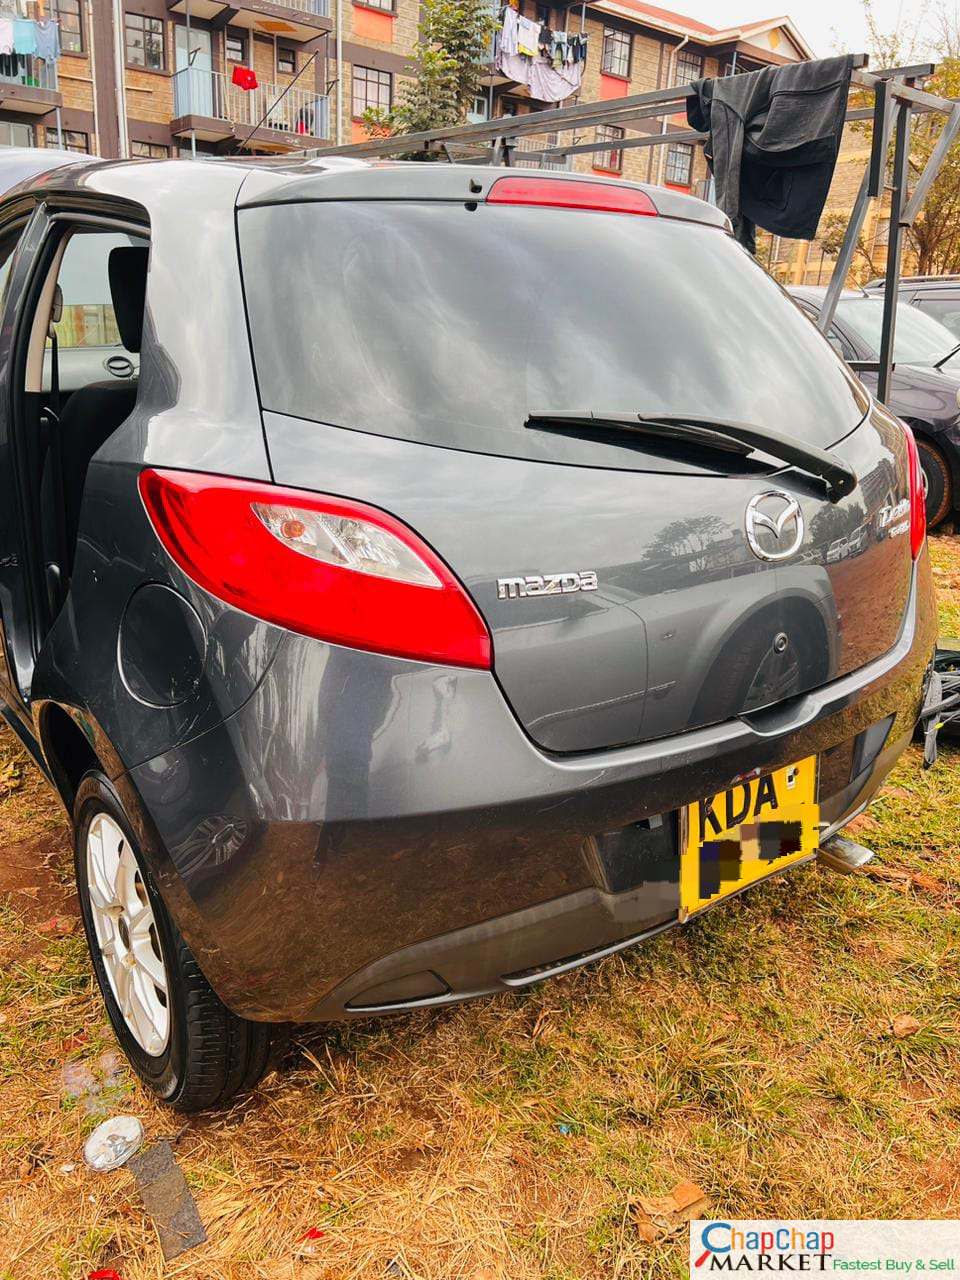 Mazda Demio For sale in Kenya  KD 580K ONLY You Pay 30% DEPOSIT TRADE IN OK EXCLUSIVE